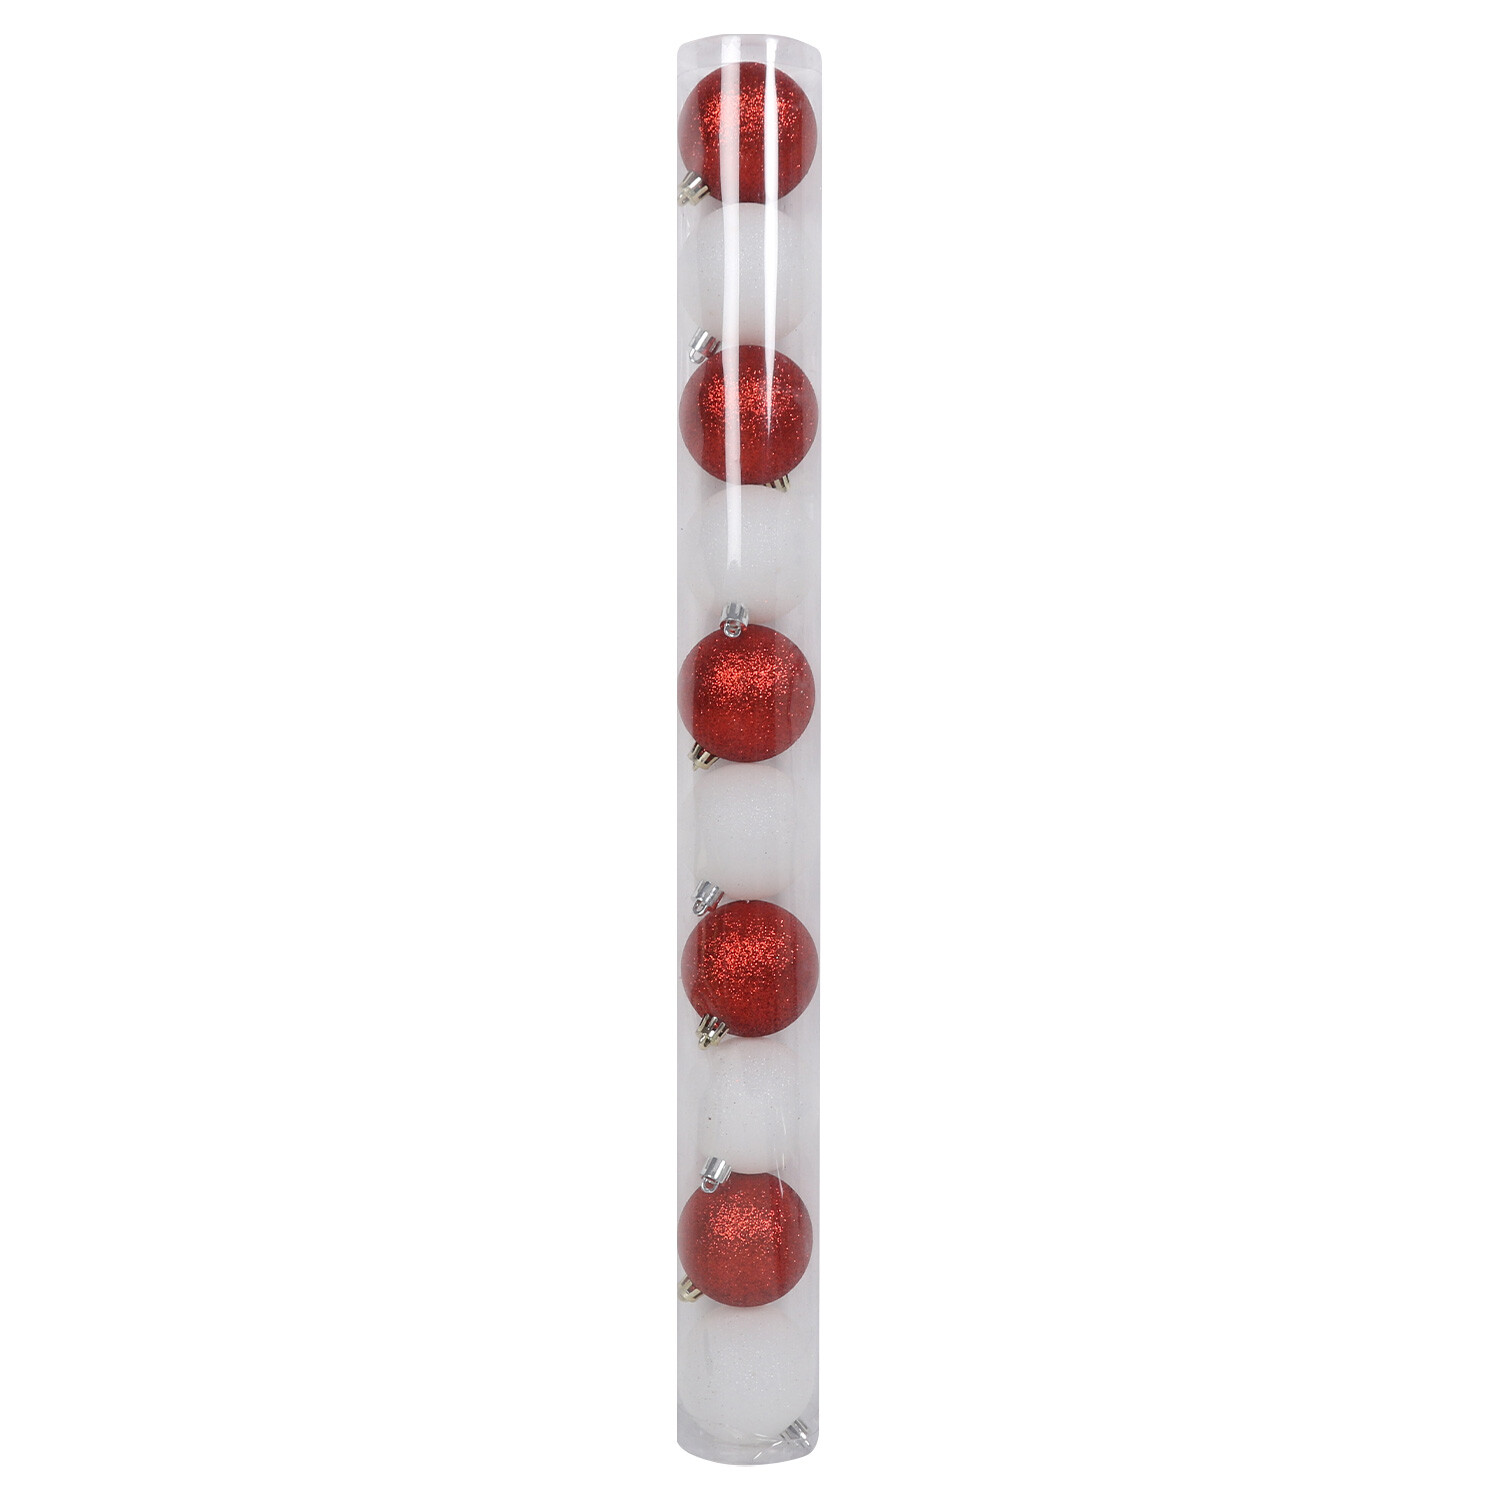 Pack of 10 Candy Cane Lane Baubles - Red Image